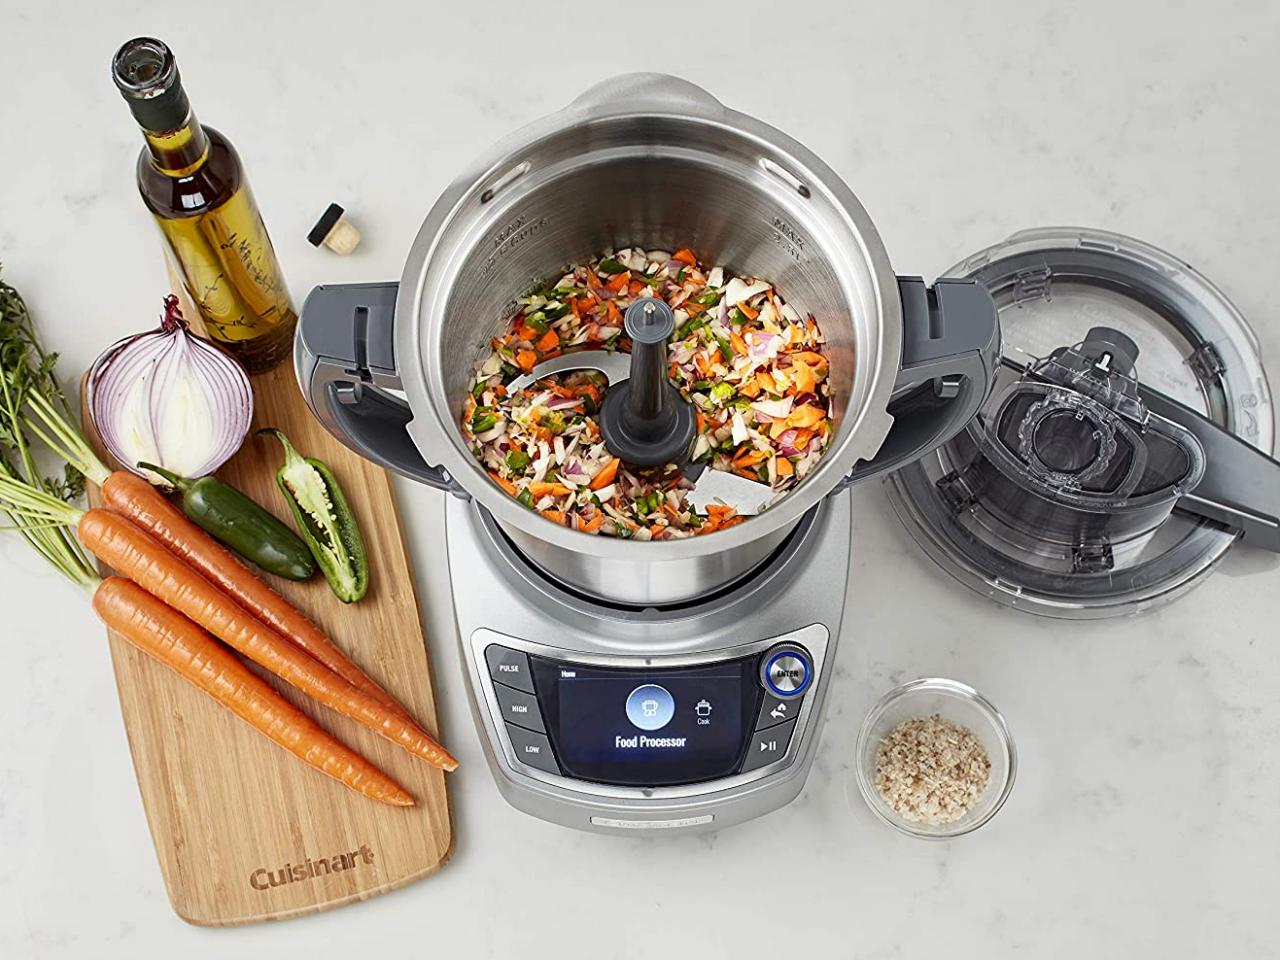  Free Bowl Worth $200 value, Multo By CookingPal, Smart  Multi-Functional Stainless Steel Food Processor Guided Recipes, WiFi  Built-In